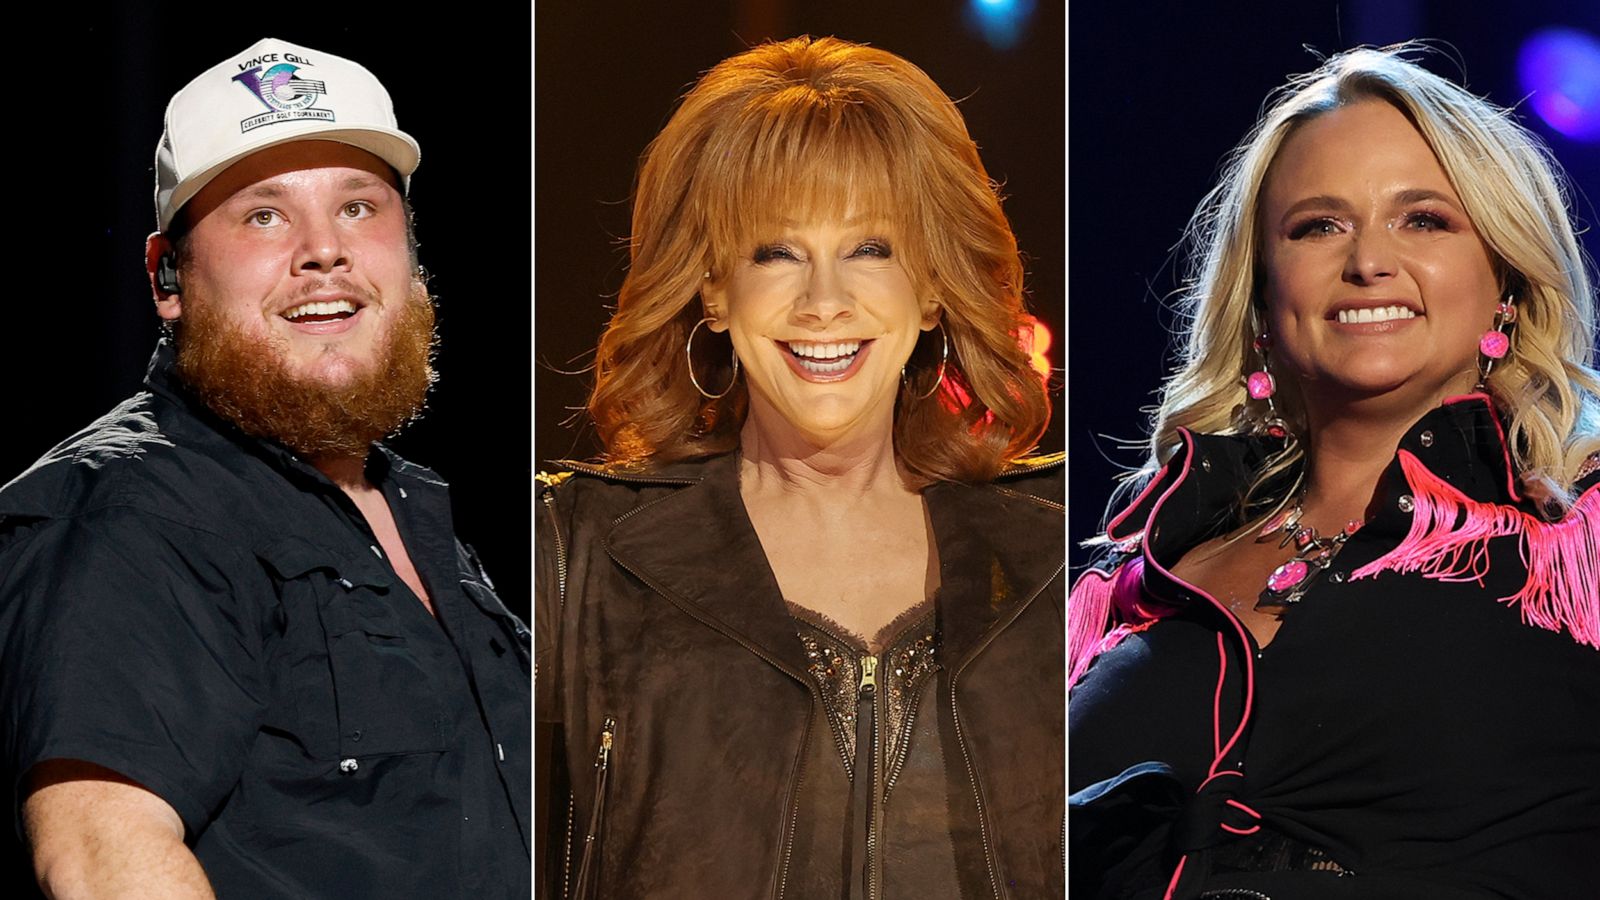 PHOTO: Luke Combs is shown at CMA Fest 2023, on June 8, 2023. | Reba McEntire and Miranda Lambert are shown at CMA Fest 2023 on June 9, 2023.